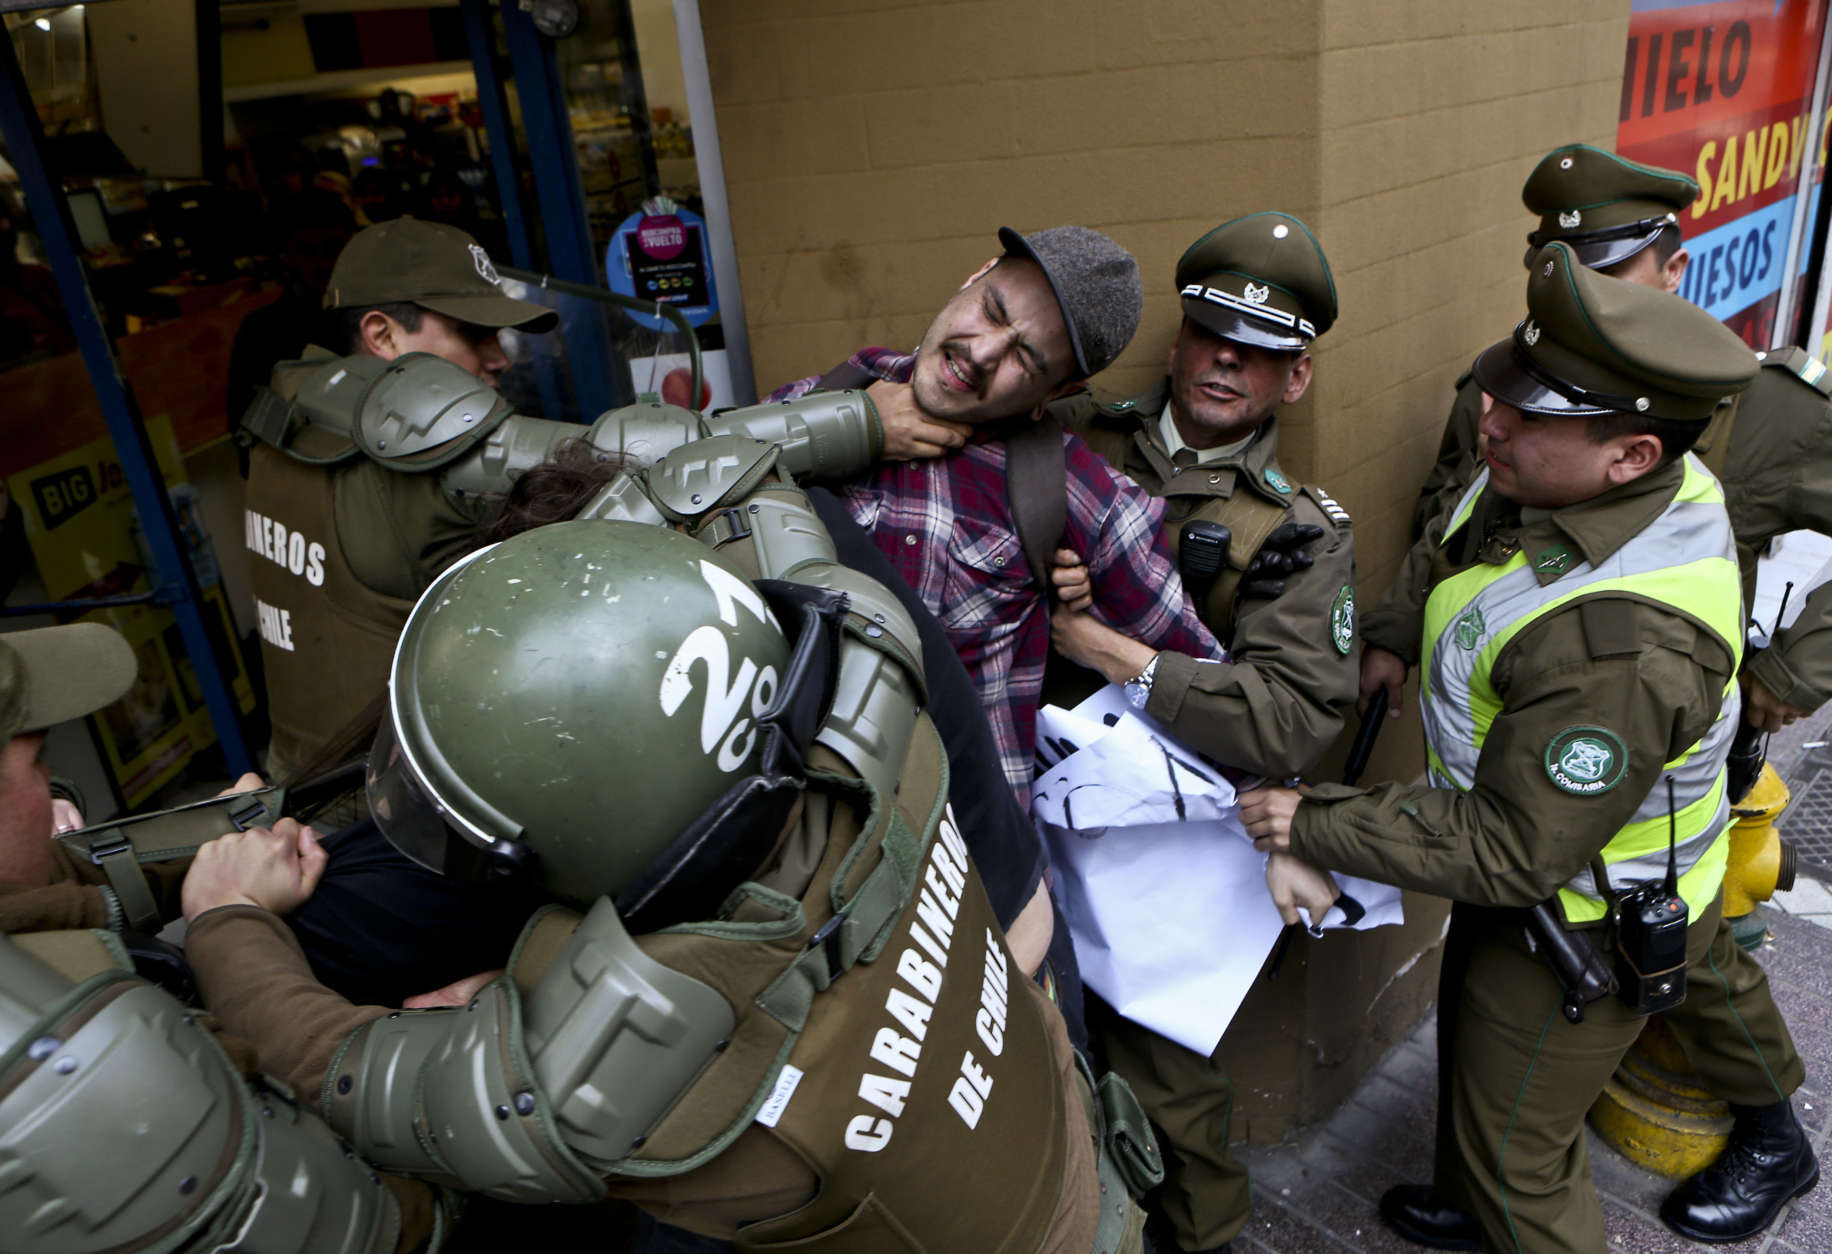 A man is detained by national police outside the Argentina consulate during a protest demanding information on the whereabouts of missing activist Santiago Maldonado, in Santiago, Chile, Thursday, Aug. 17, 2017. Maldonado’s family says he went missing Aug. 1, when he was taking part in a protest supporting the land claims by the indigenous Mapuche community. They say border police detained him when he was blocking a road with other protesters in Chubut province, about 1,100 miles (1,800 kilometers) southeast of Argentina’s capital. (AP Photo/Esteban Felix)